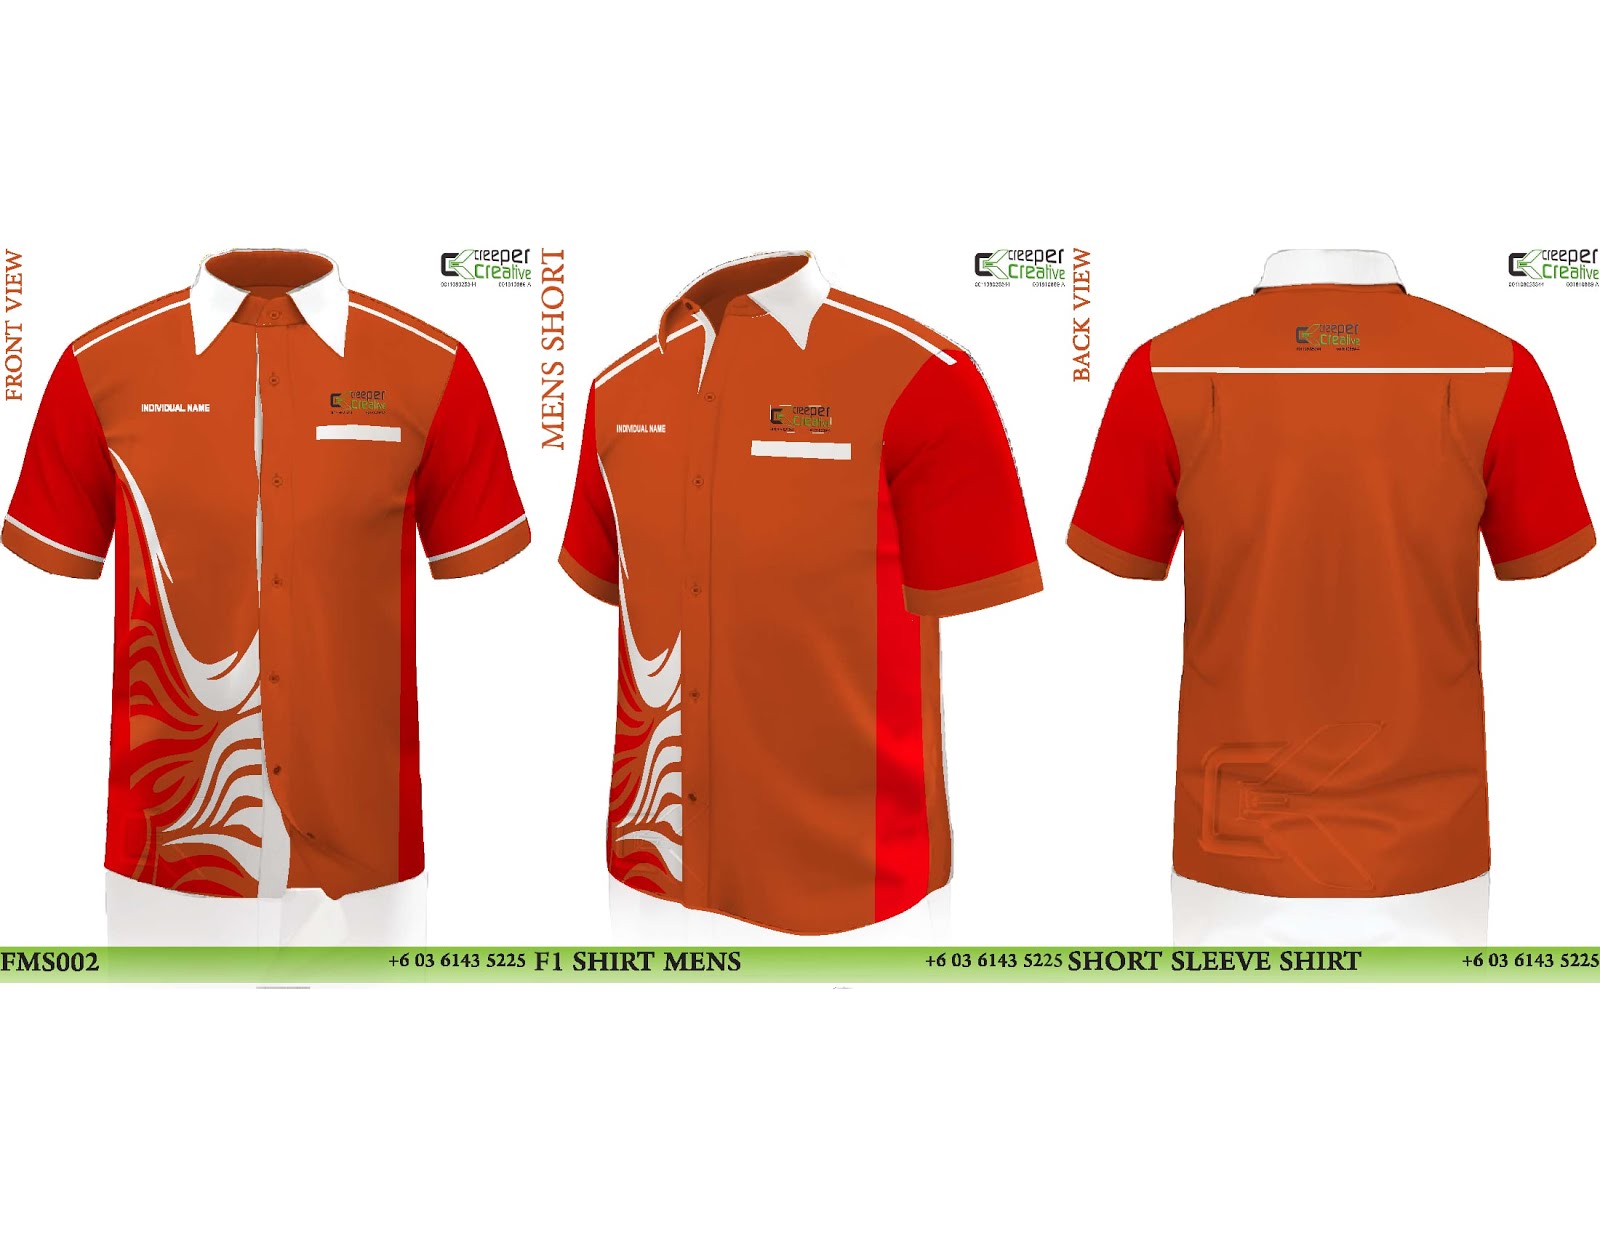 Corporate Clothing Uniform And Embroidery